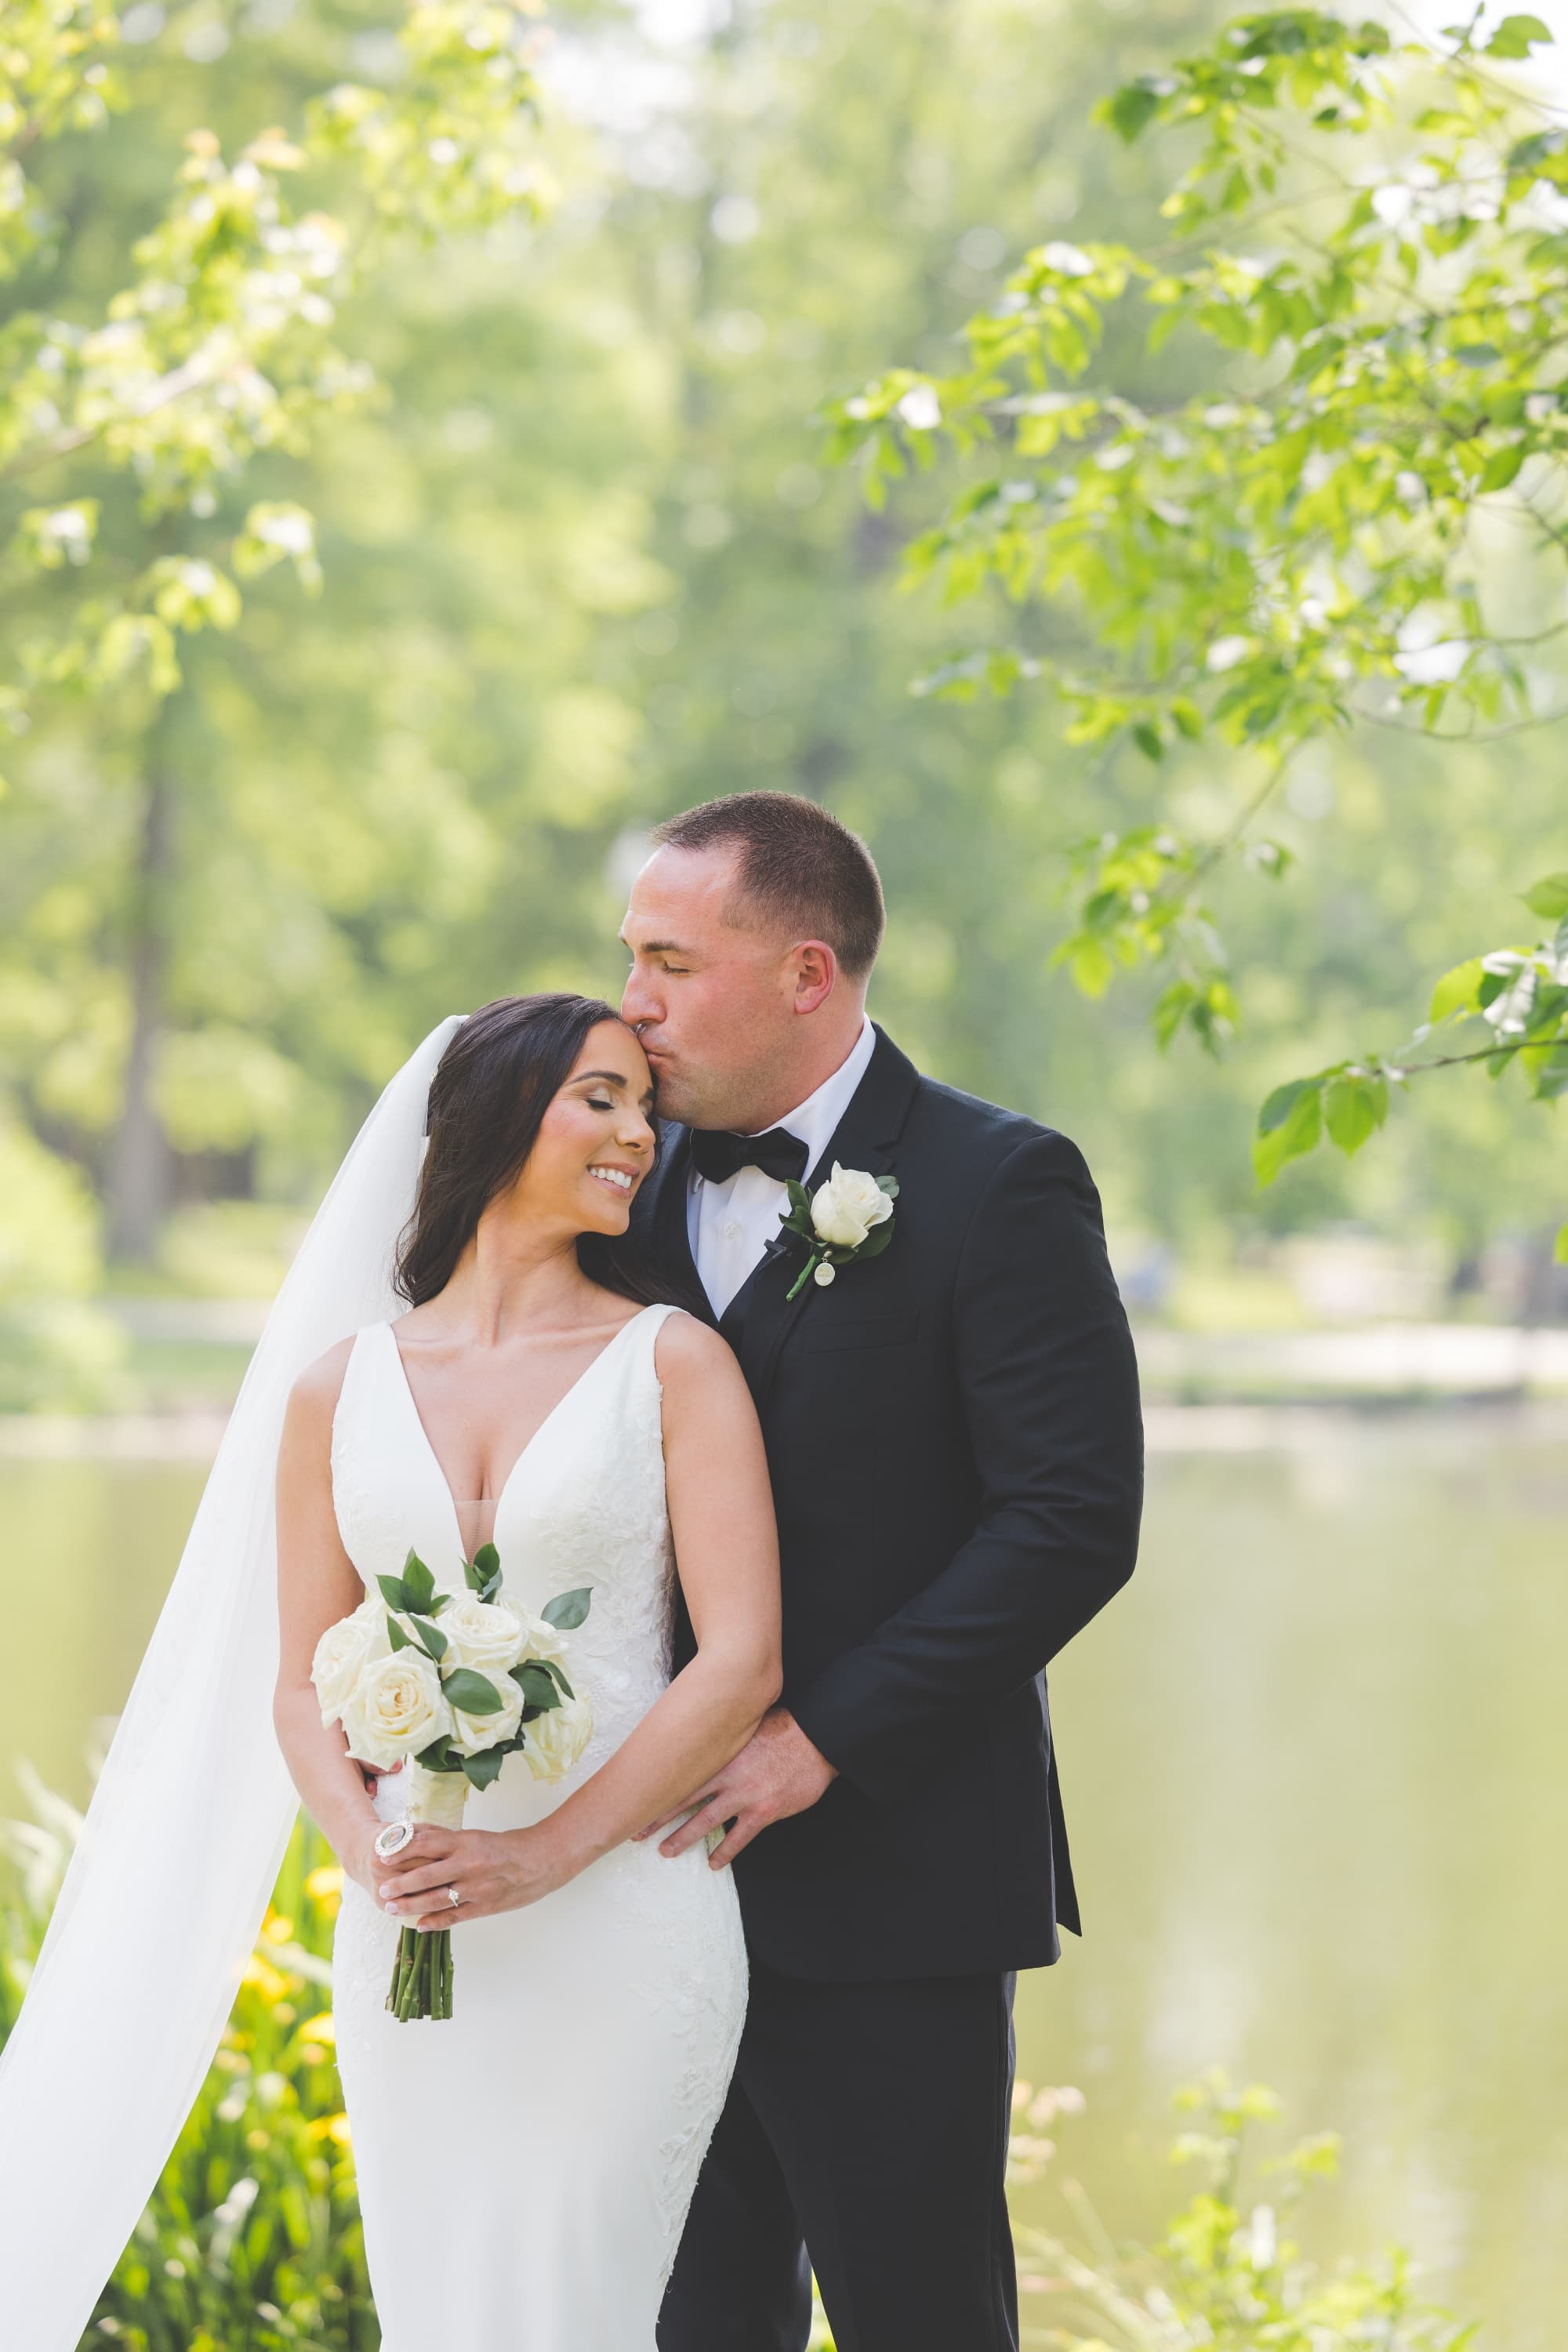 The Essential Checklist: 10 First Steps to Planning Your New Jersey Wedding